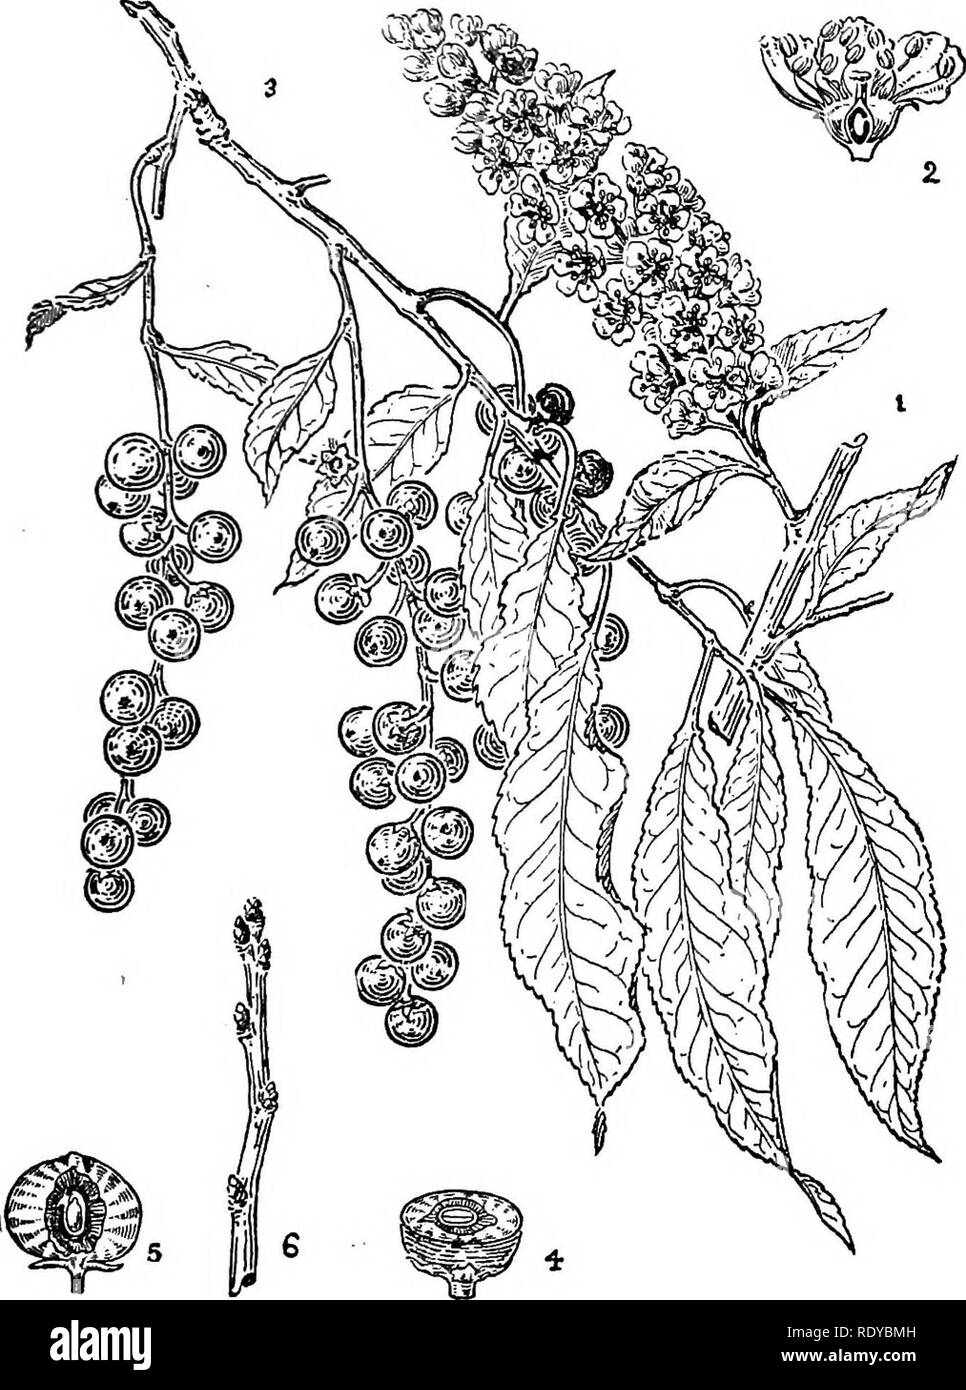 . A manual of poisonous plants, chiefly of eastern North America, with brief notes on economic and medicinal plants, and numerous illustrations. Poisonous plants. ROSACEAE—PRUNUS 515 Prunus demissa Walp. Western Wild Cherry or Choke Cherry, A shrub or small tree; leaves thick and oval or obovate, acute or more or less obtuse at the apex; teeth rather short; flowers white in dense racemes, terminating leafy branches; fruit dark or purplish black, less astringent than the preceding. Distribution. Dry soil, common in thickets and woods from Dakota to Kansas, New Mexico to California and British C Stock Photo